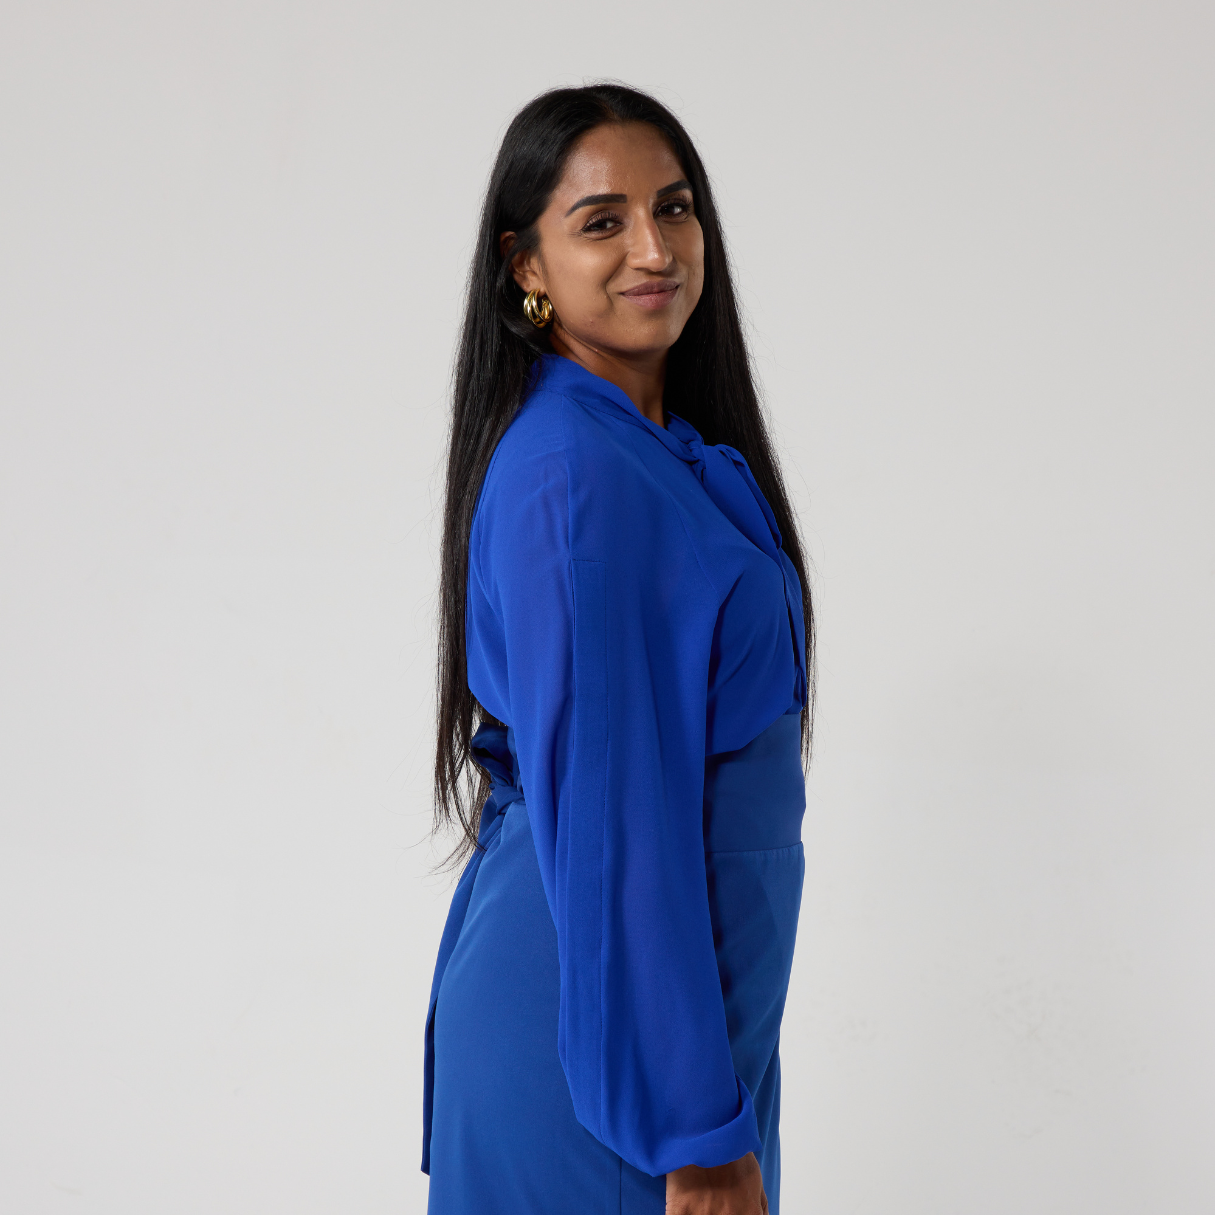 A south asian woman shows a side profile of her body whilst turning her head to look at the camera. She is wearing a royal blue chiffon shirt, there is a concealed opening down the length of the sleeve which has a slight bell shape to its hem.